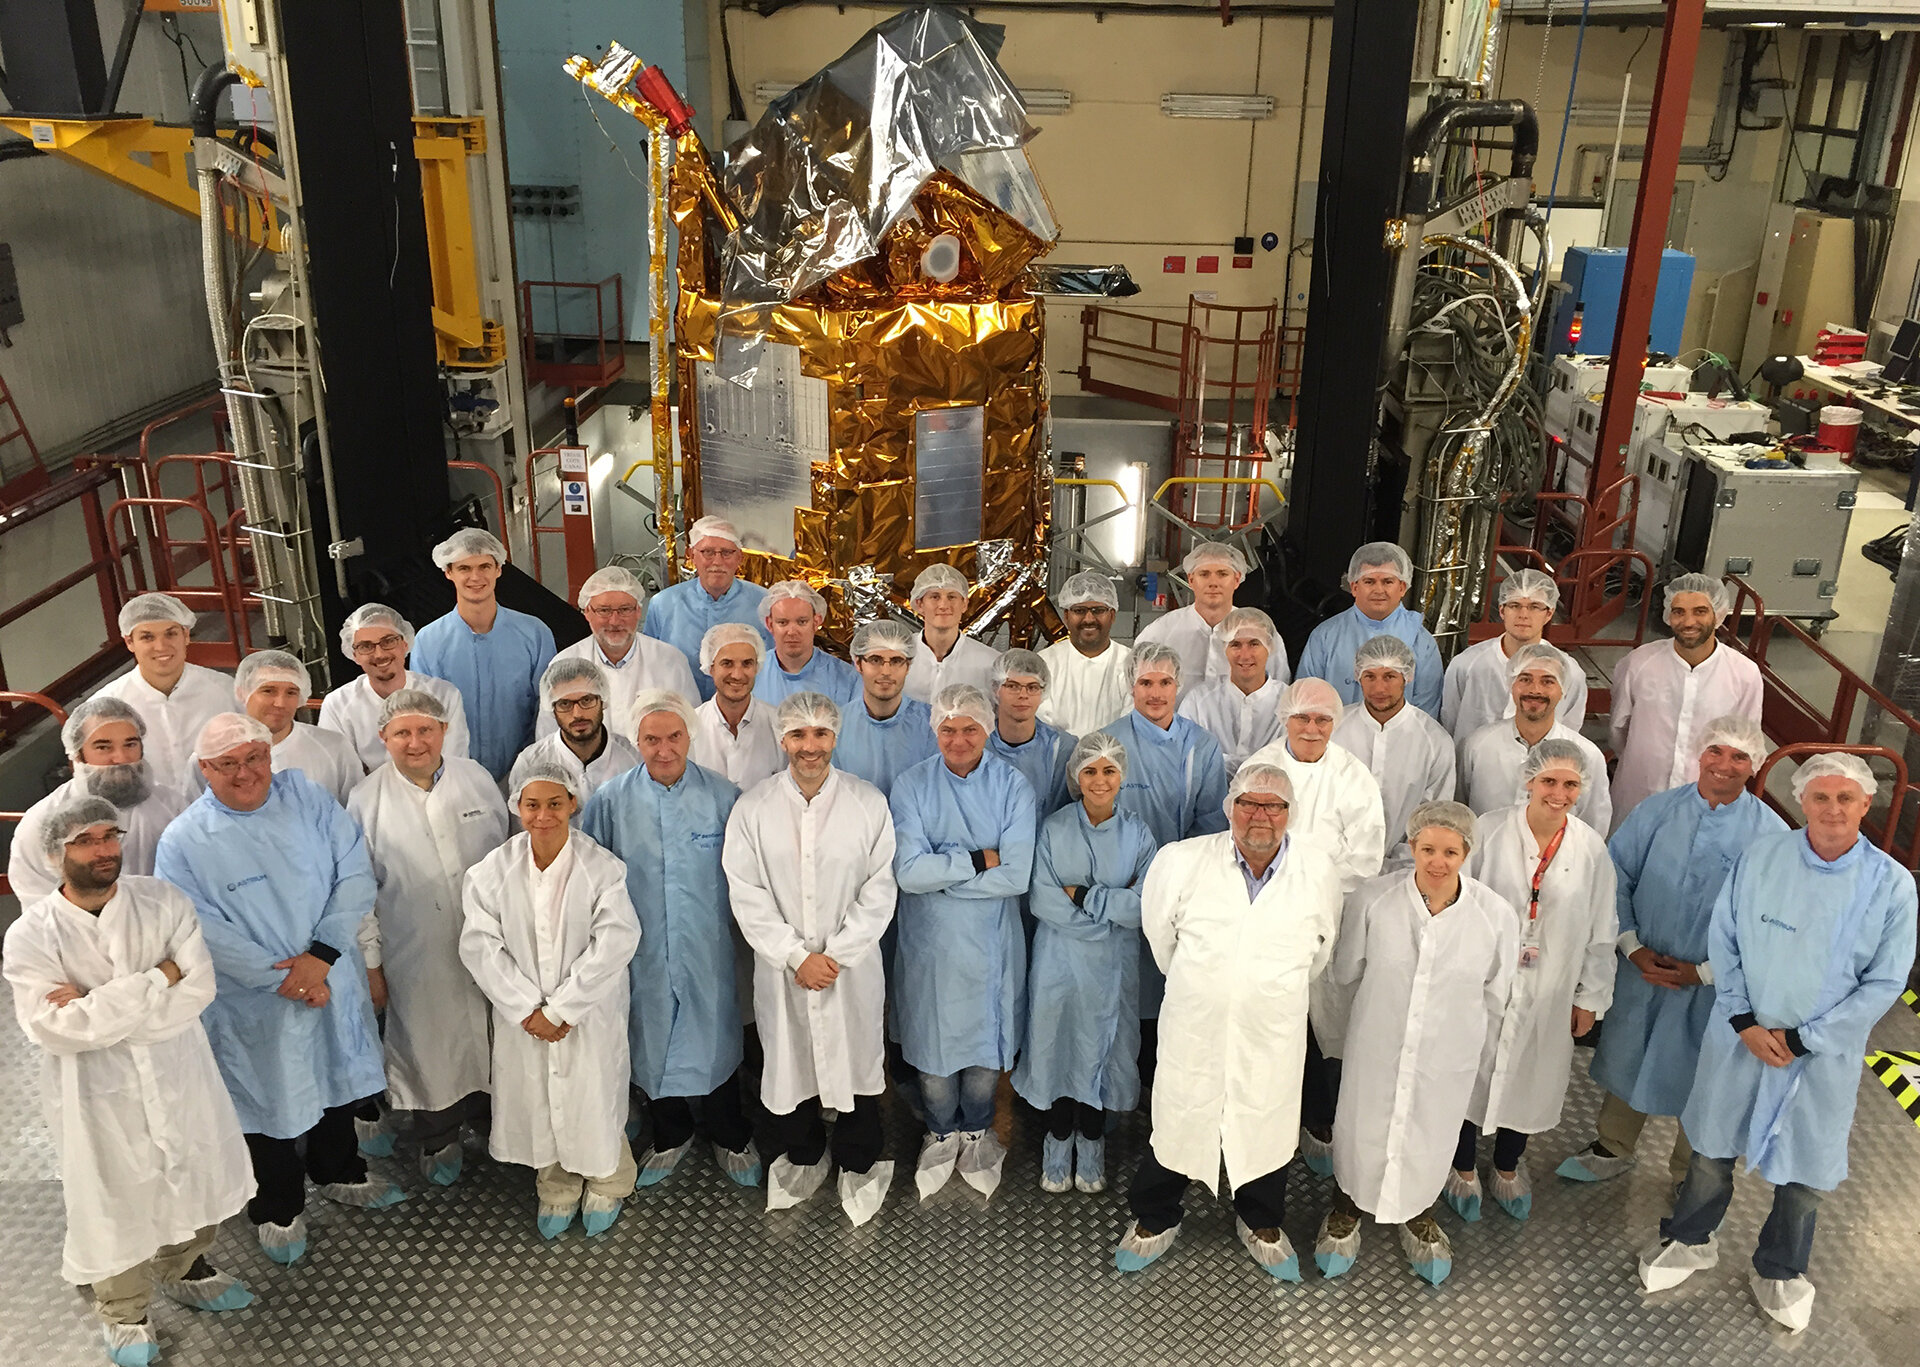 Sentinel-5P is in the background, behind lots of mission scientists and engineers